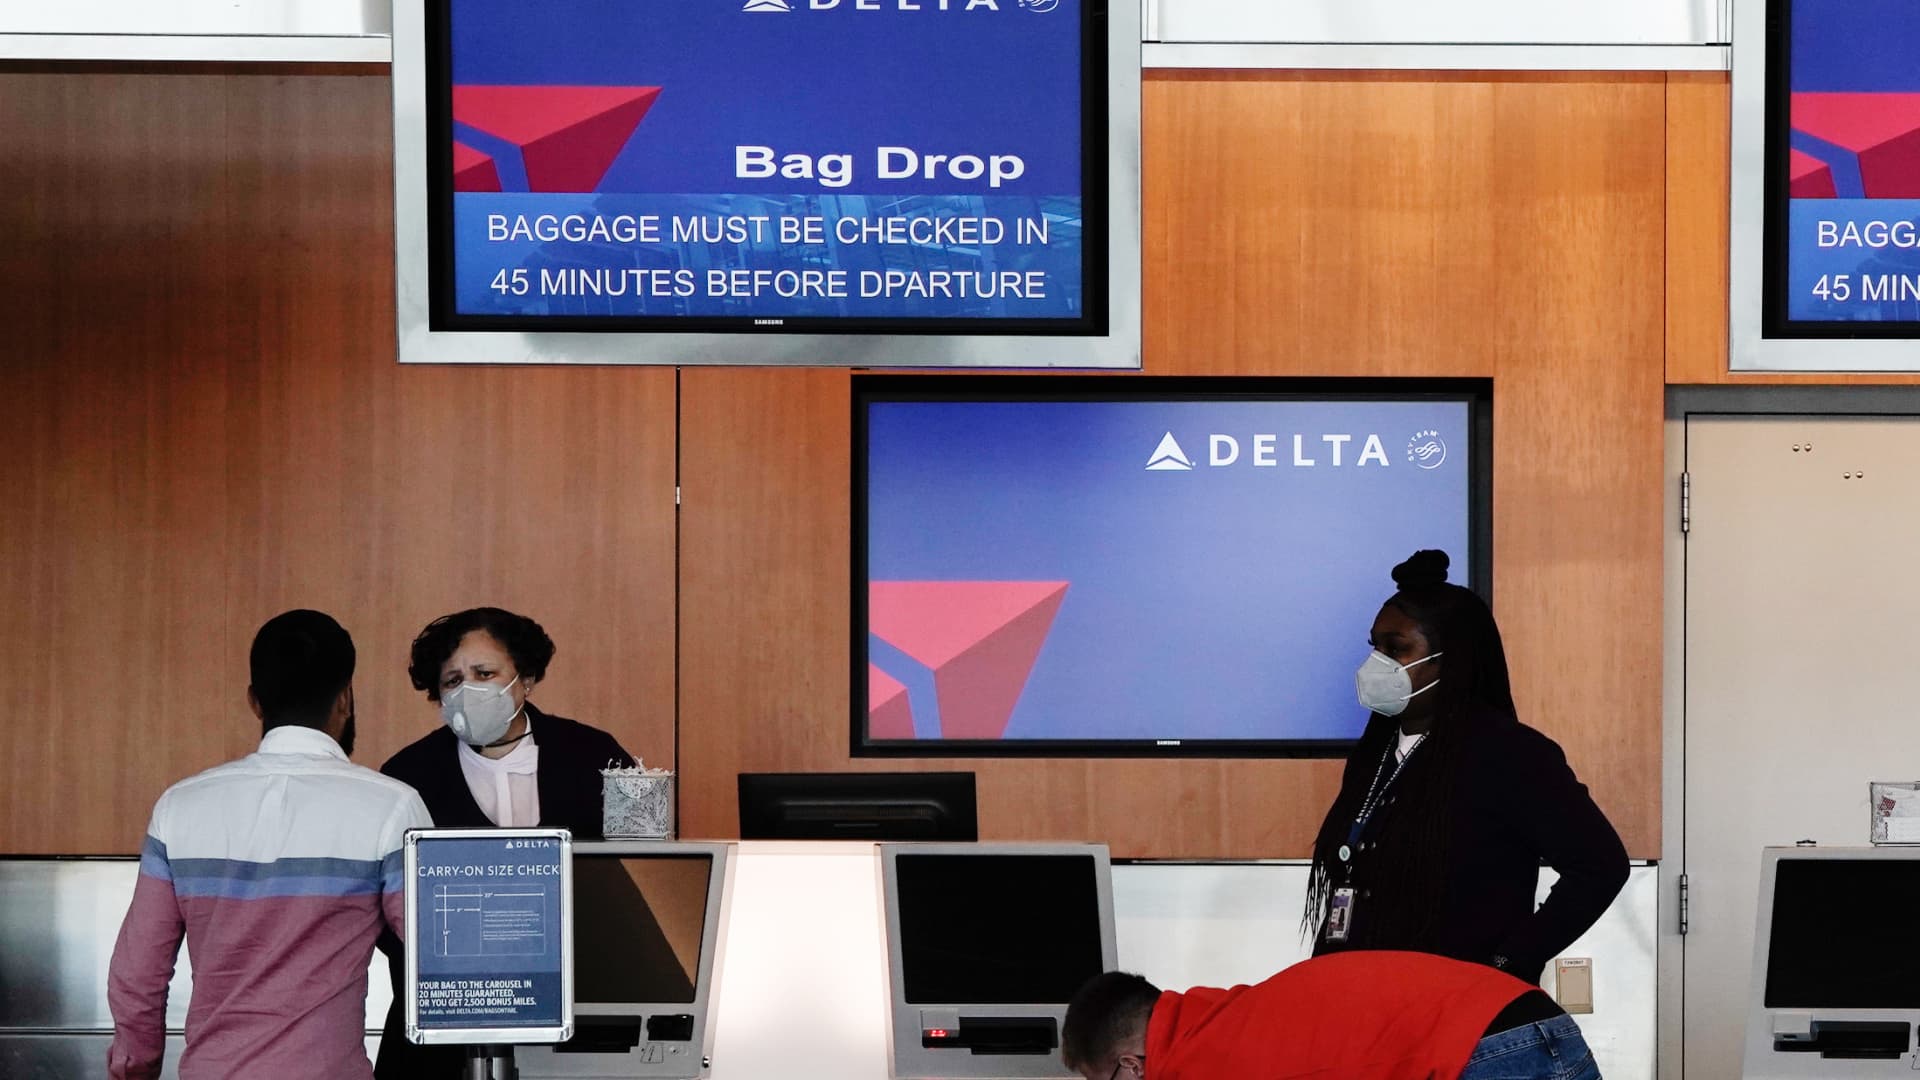 Gate agents assist travelers at a Delta Air Lines Inc. bag drop counter at the San Diego International Airport (SAN) in San Diego, California, U.S., on Monday, April 27, 2020.